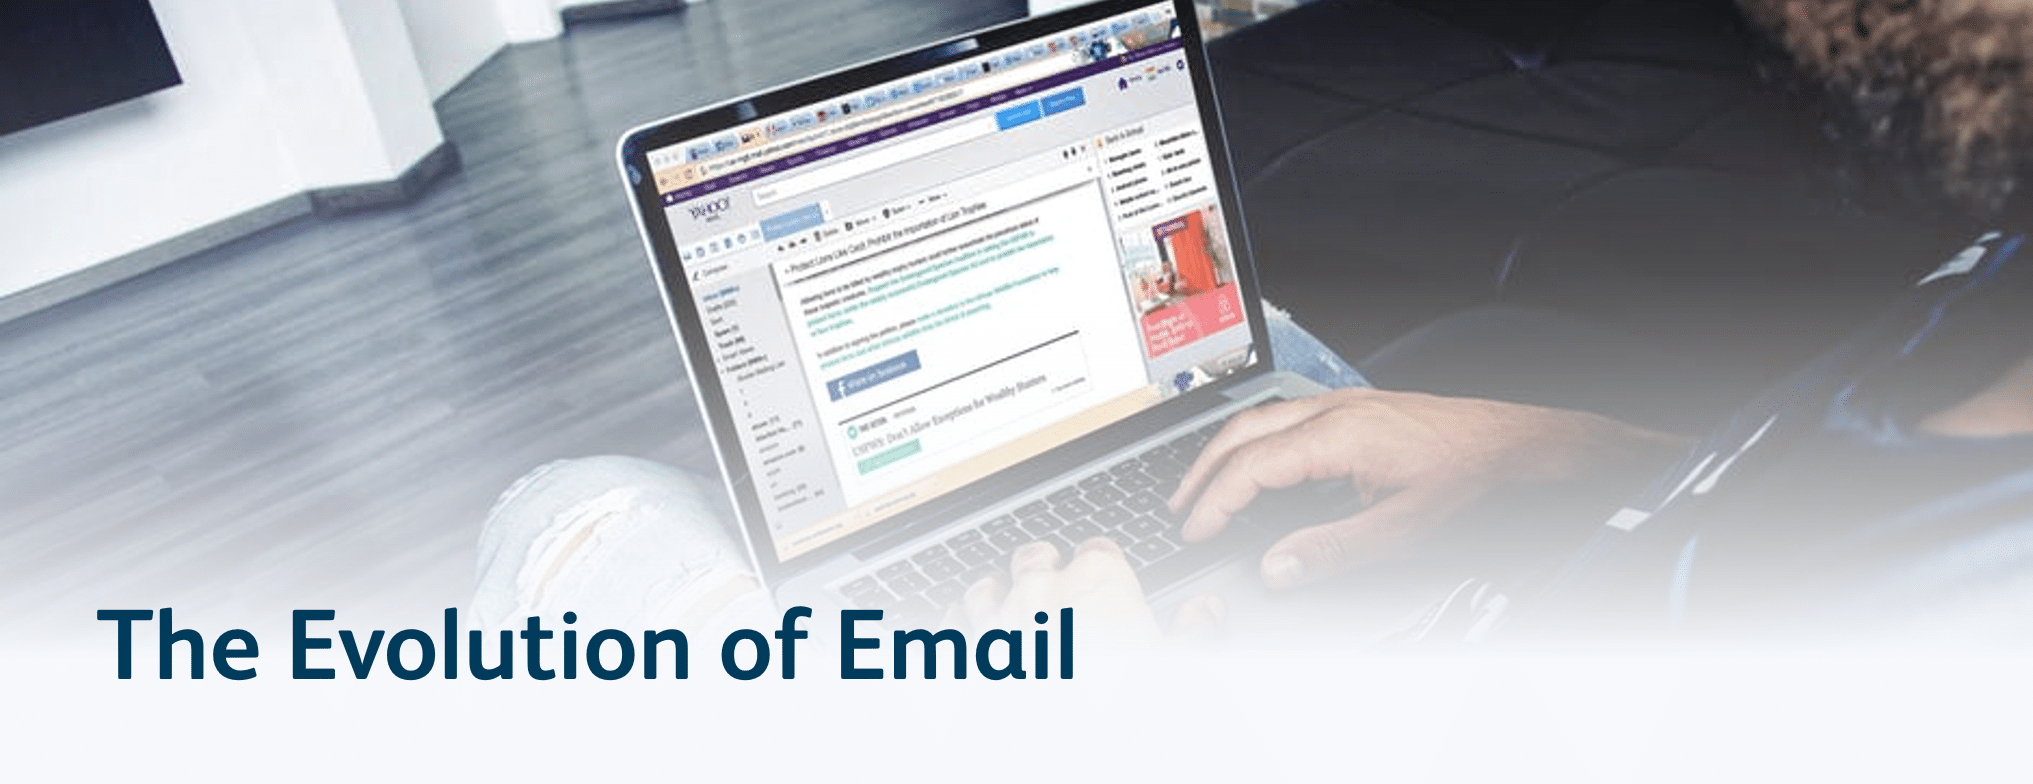 The Evolution of Email